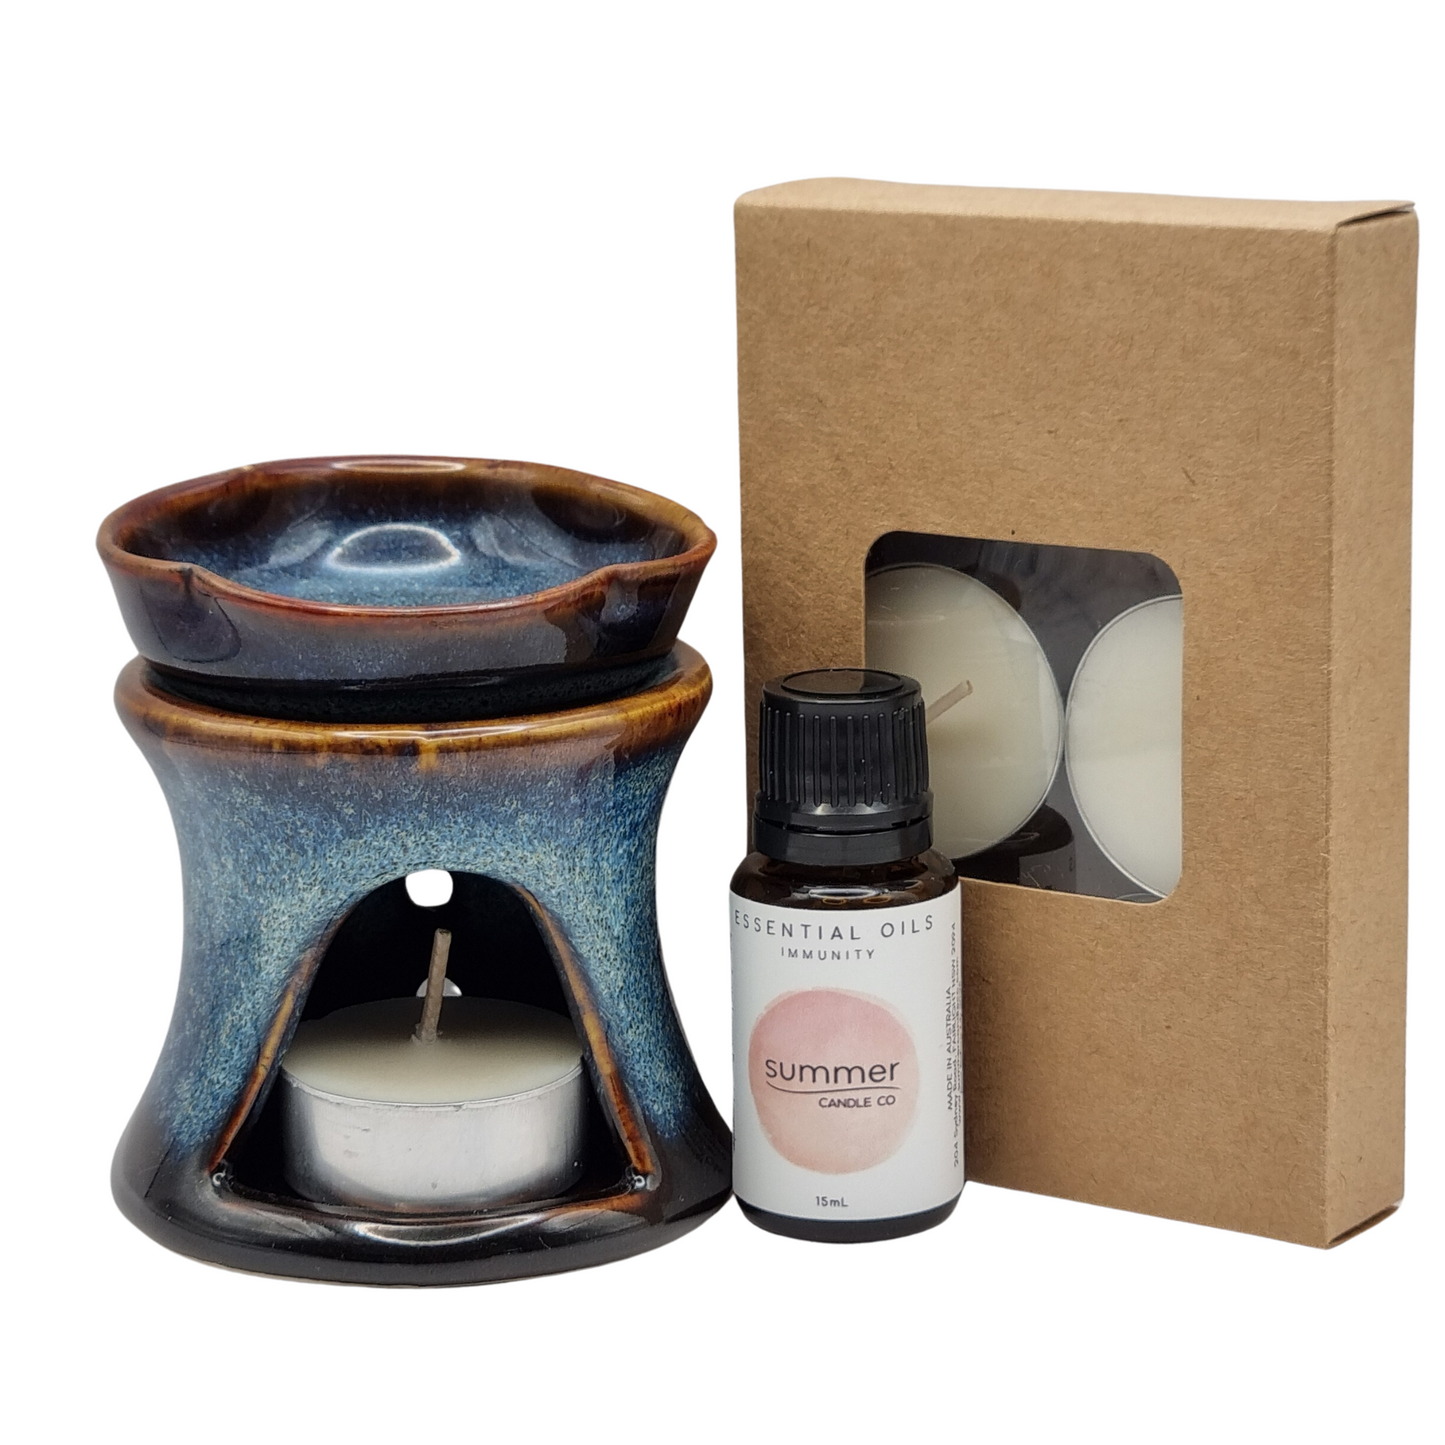 Bundle Pack Ceramic Blue Oil Burner with Immunity Essential Oil and 6 pack of Tealights